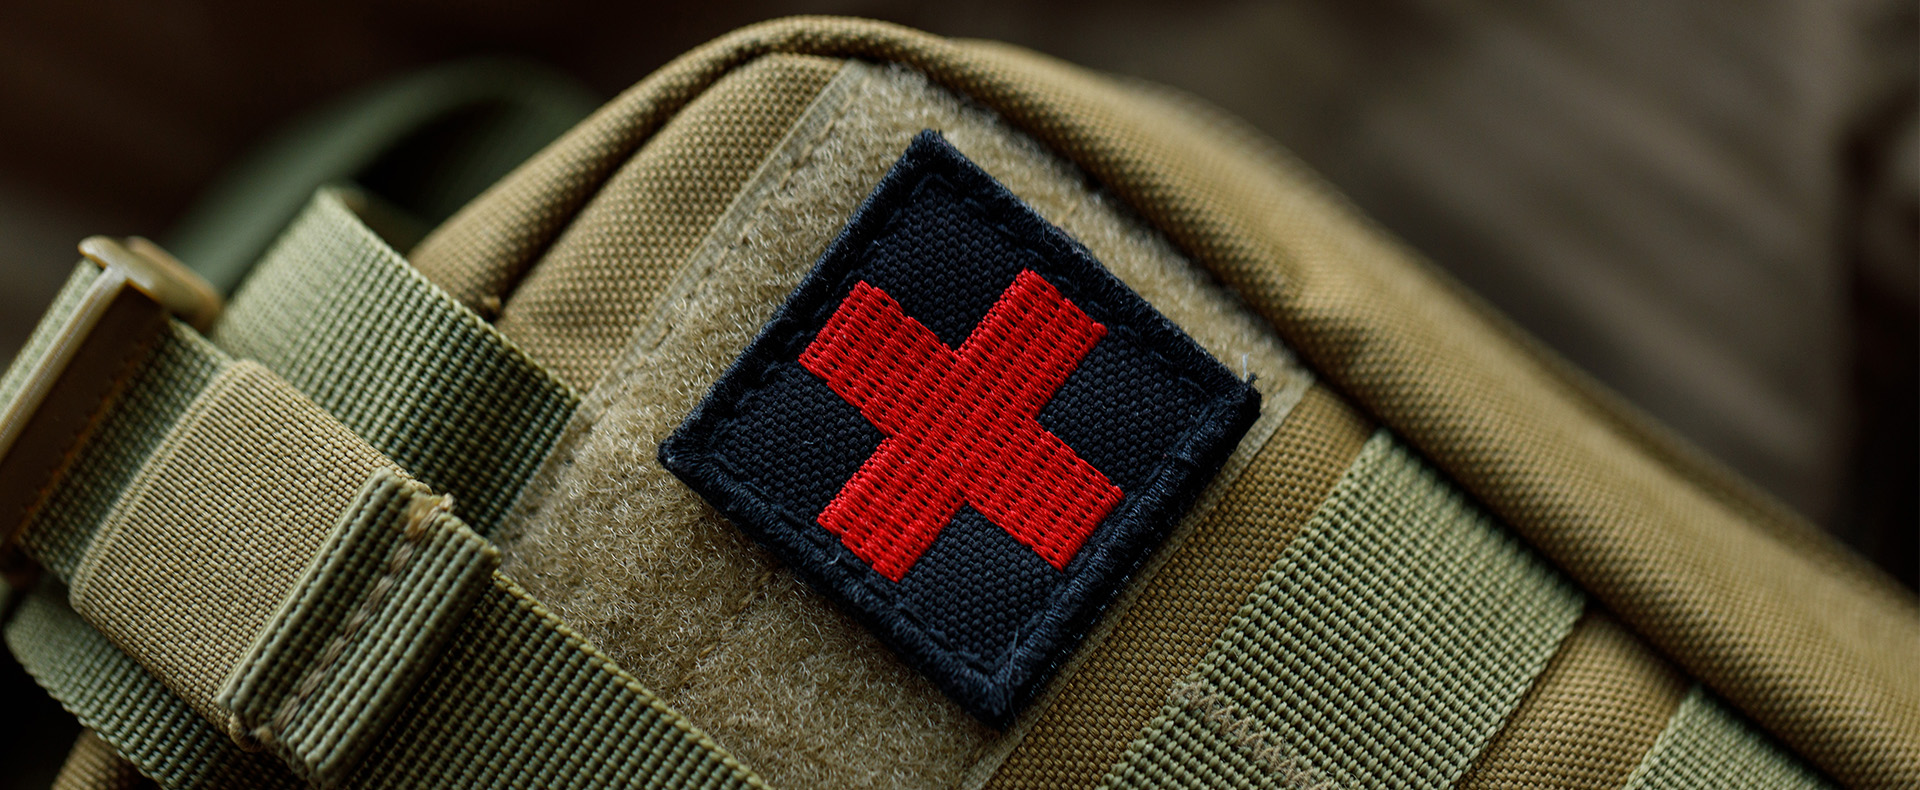 Medic patch on military sleeve